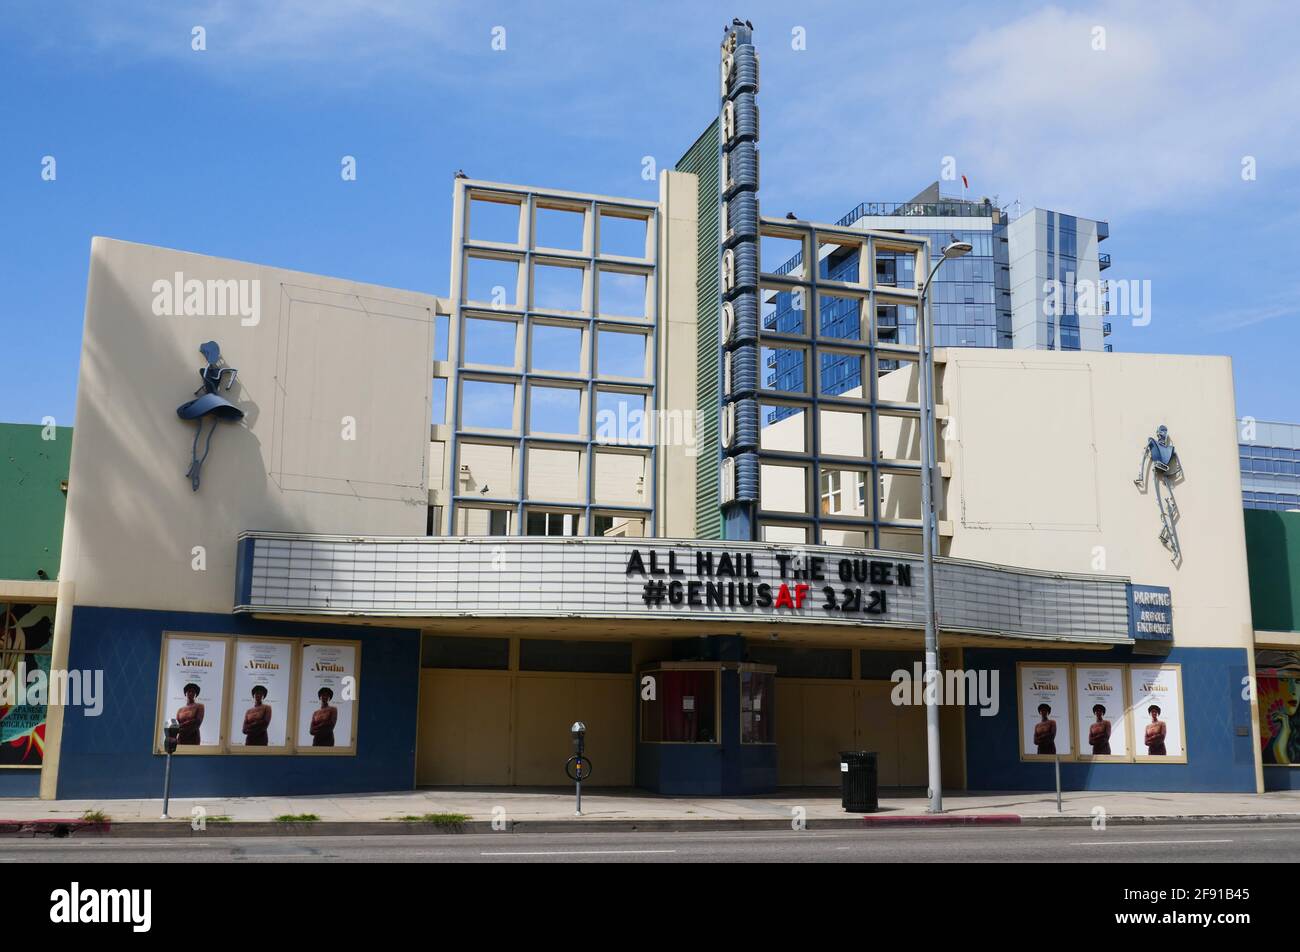 Los Angeles, California, USA 14th April 2021 A general view of atmosphere  Hollywood Palladium Marquee 'All Hail The Queen', at this venue where  Coldplay, Muse, Green Day, Brandi Carlile, Sum 41, Nine